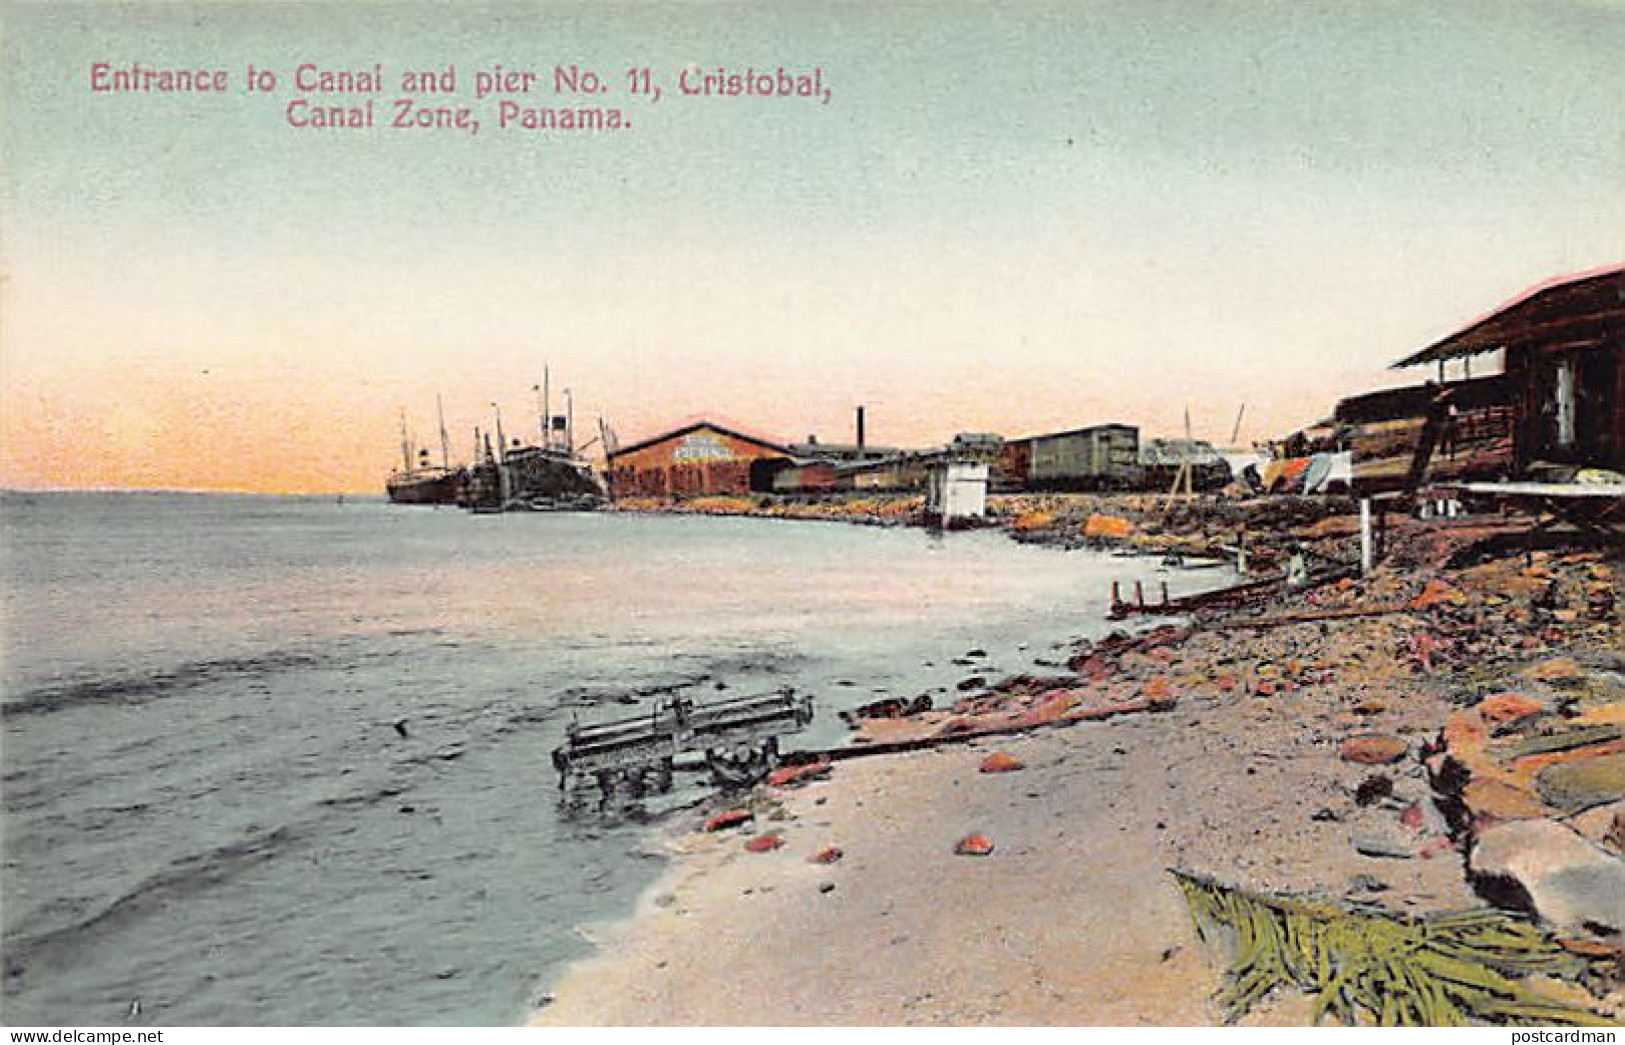 Canal De Panamá - CRISTOBAL - Entrance To Canal And Pier No. 11 - Publ. I. L. Maduro Jr. 74C - Panama